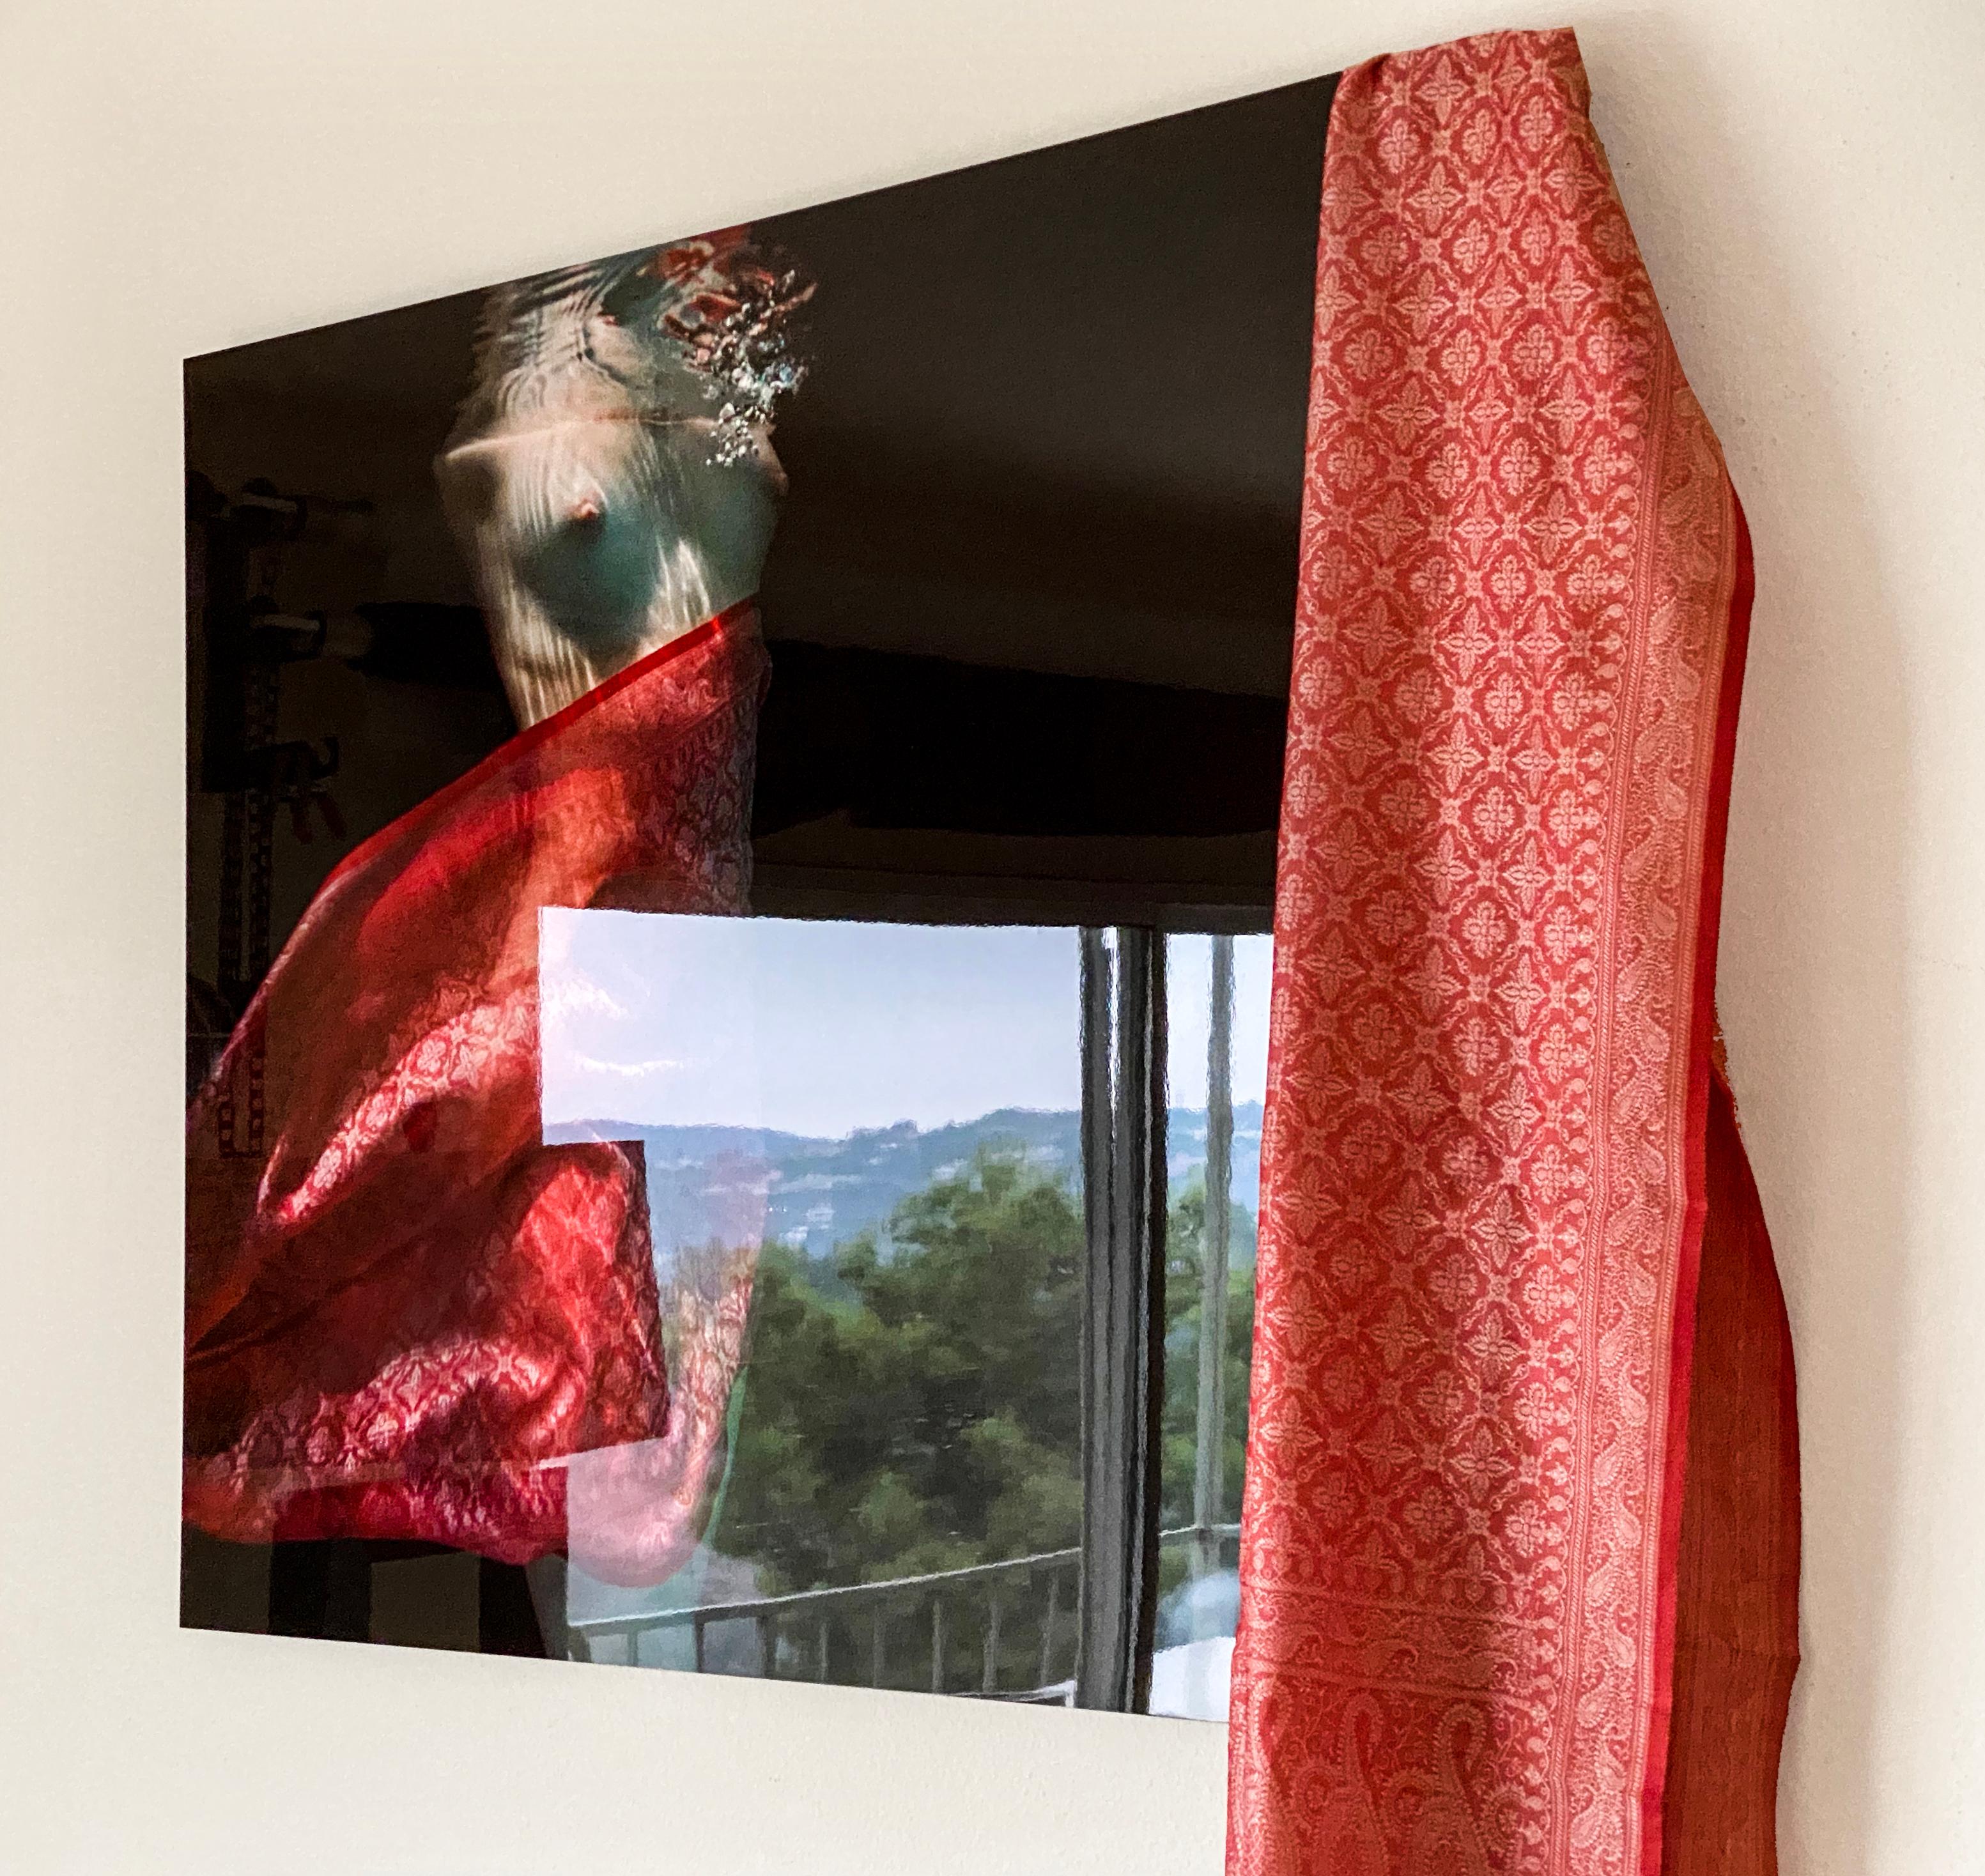 Indian Scarf  - underwater nude photograph - print on aluminum - with the scarf - Contemporary Photograph by Alex Sher